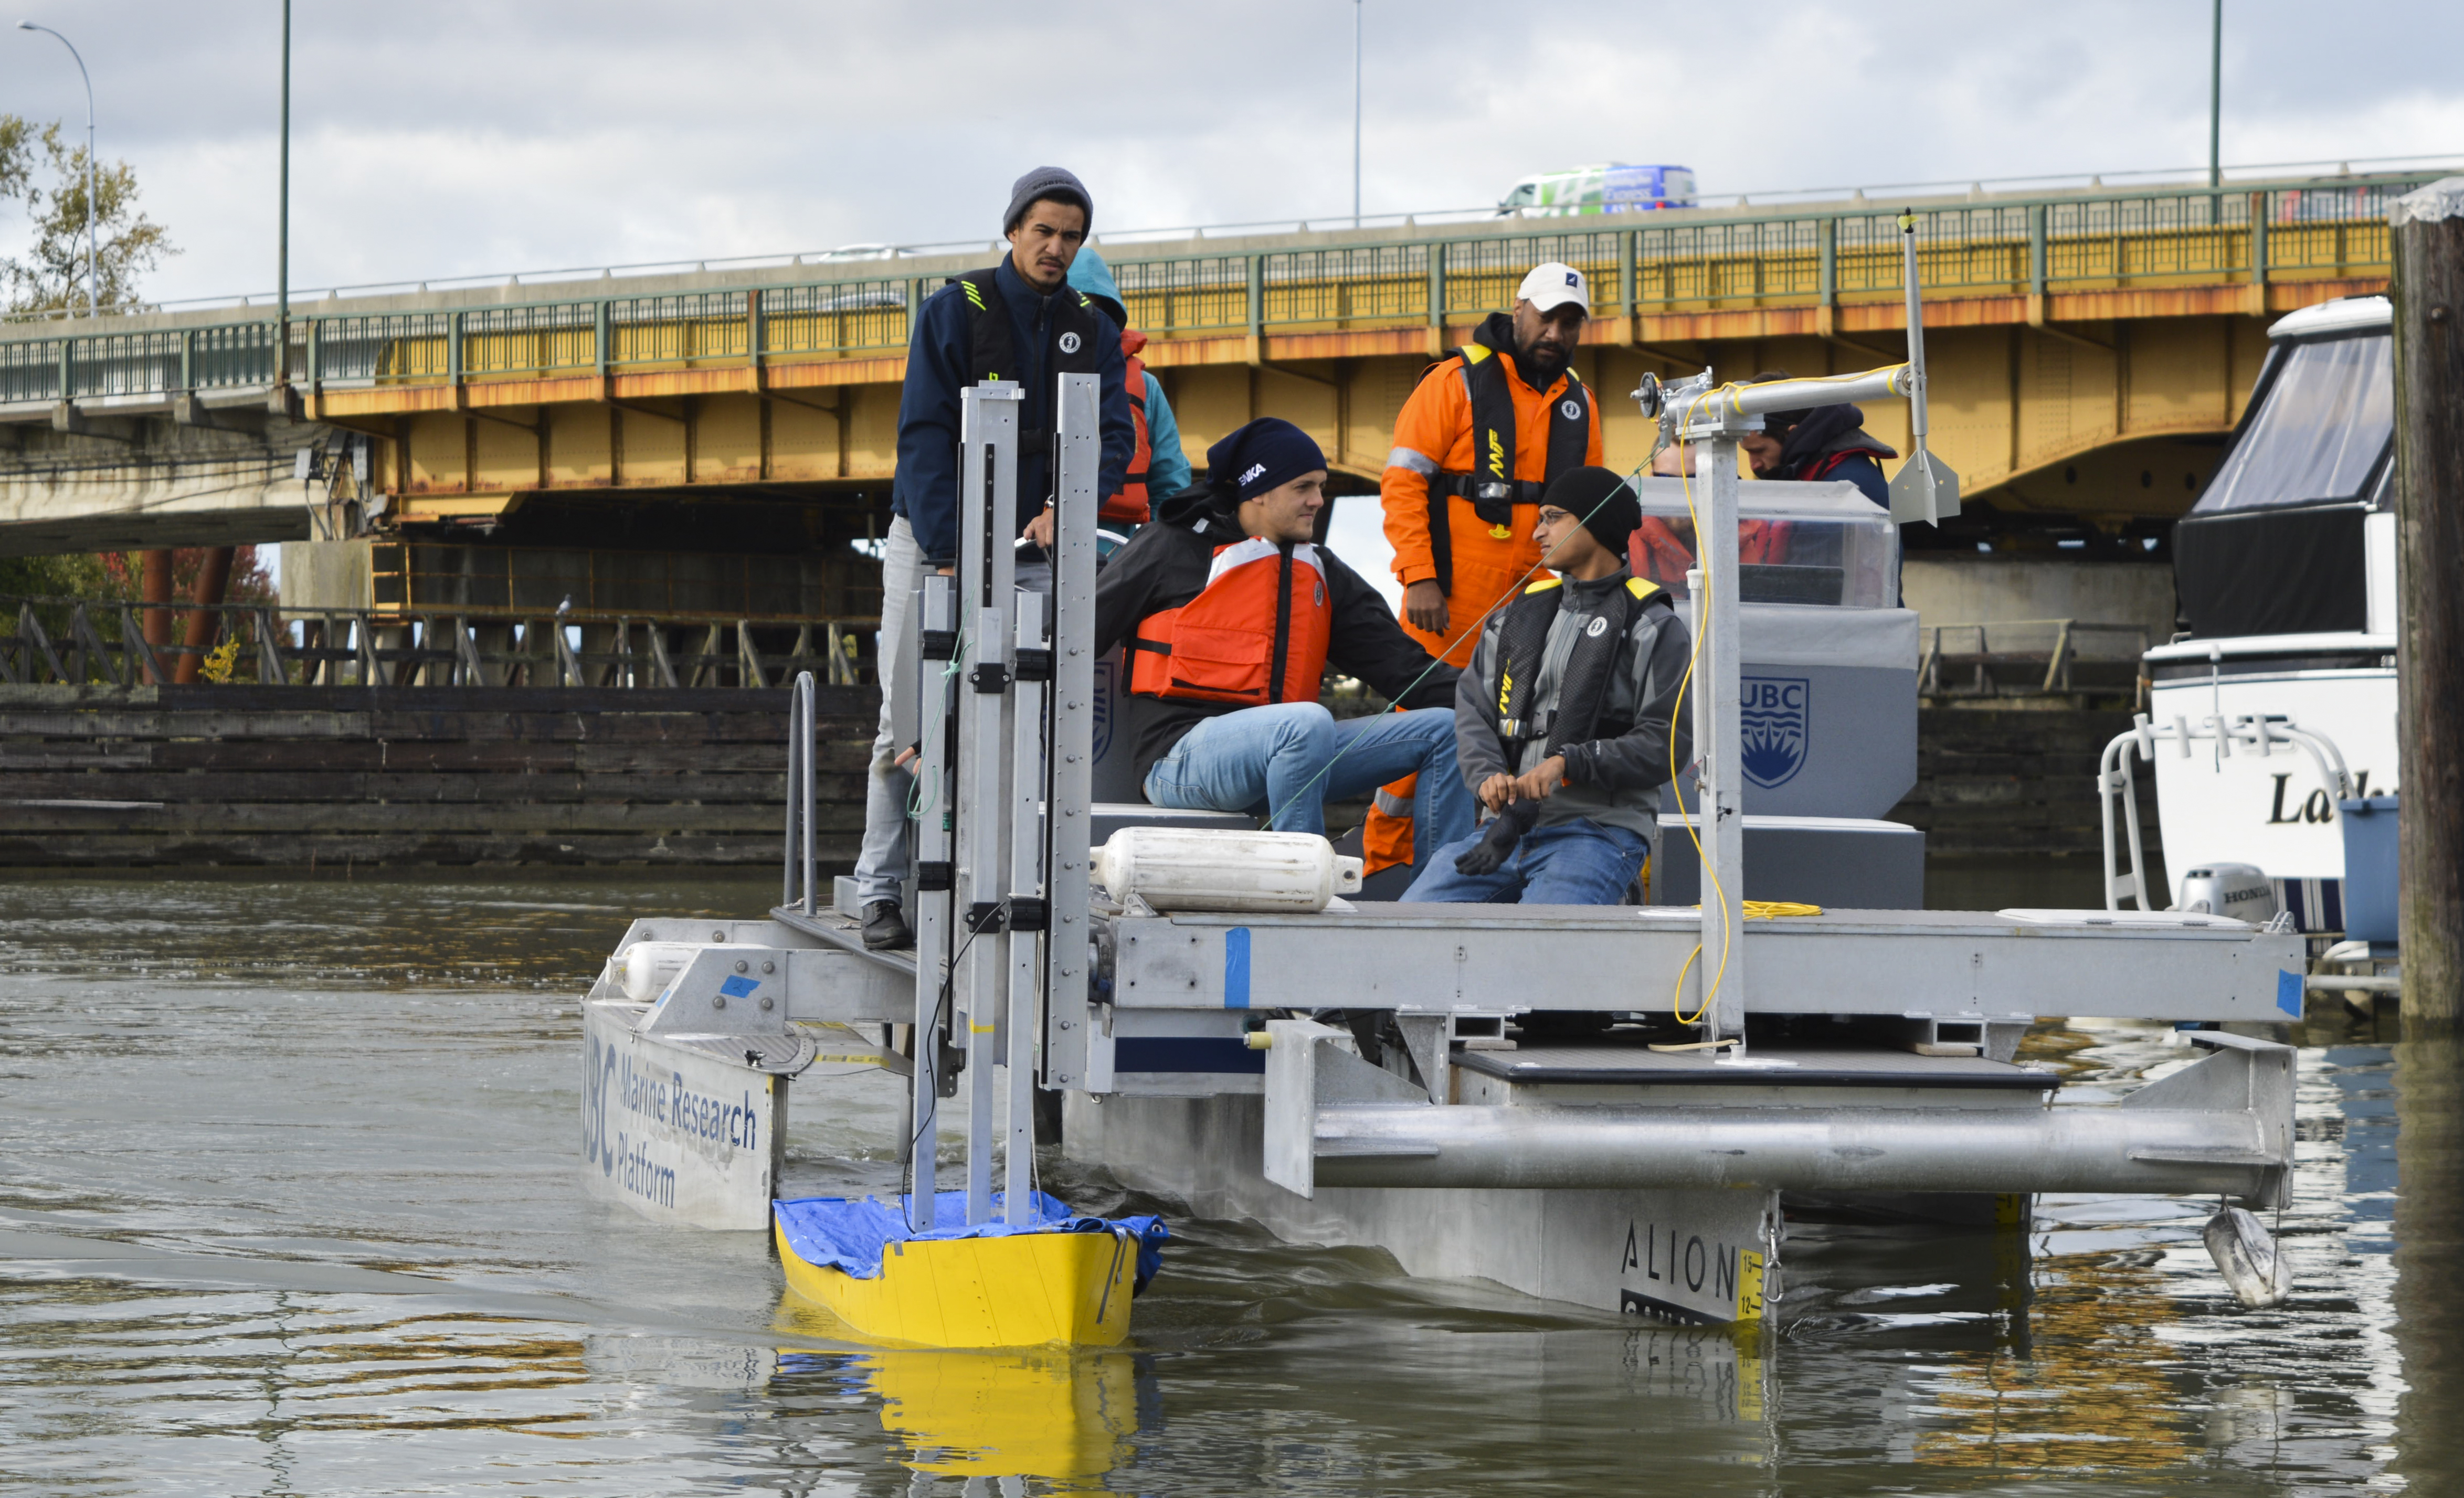 Students testing their model hull design aboard the new UBC Marine Research Platform.